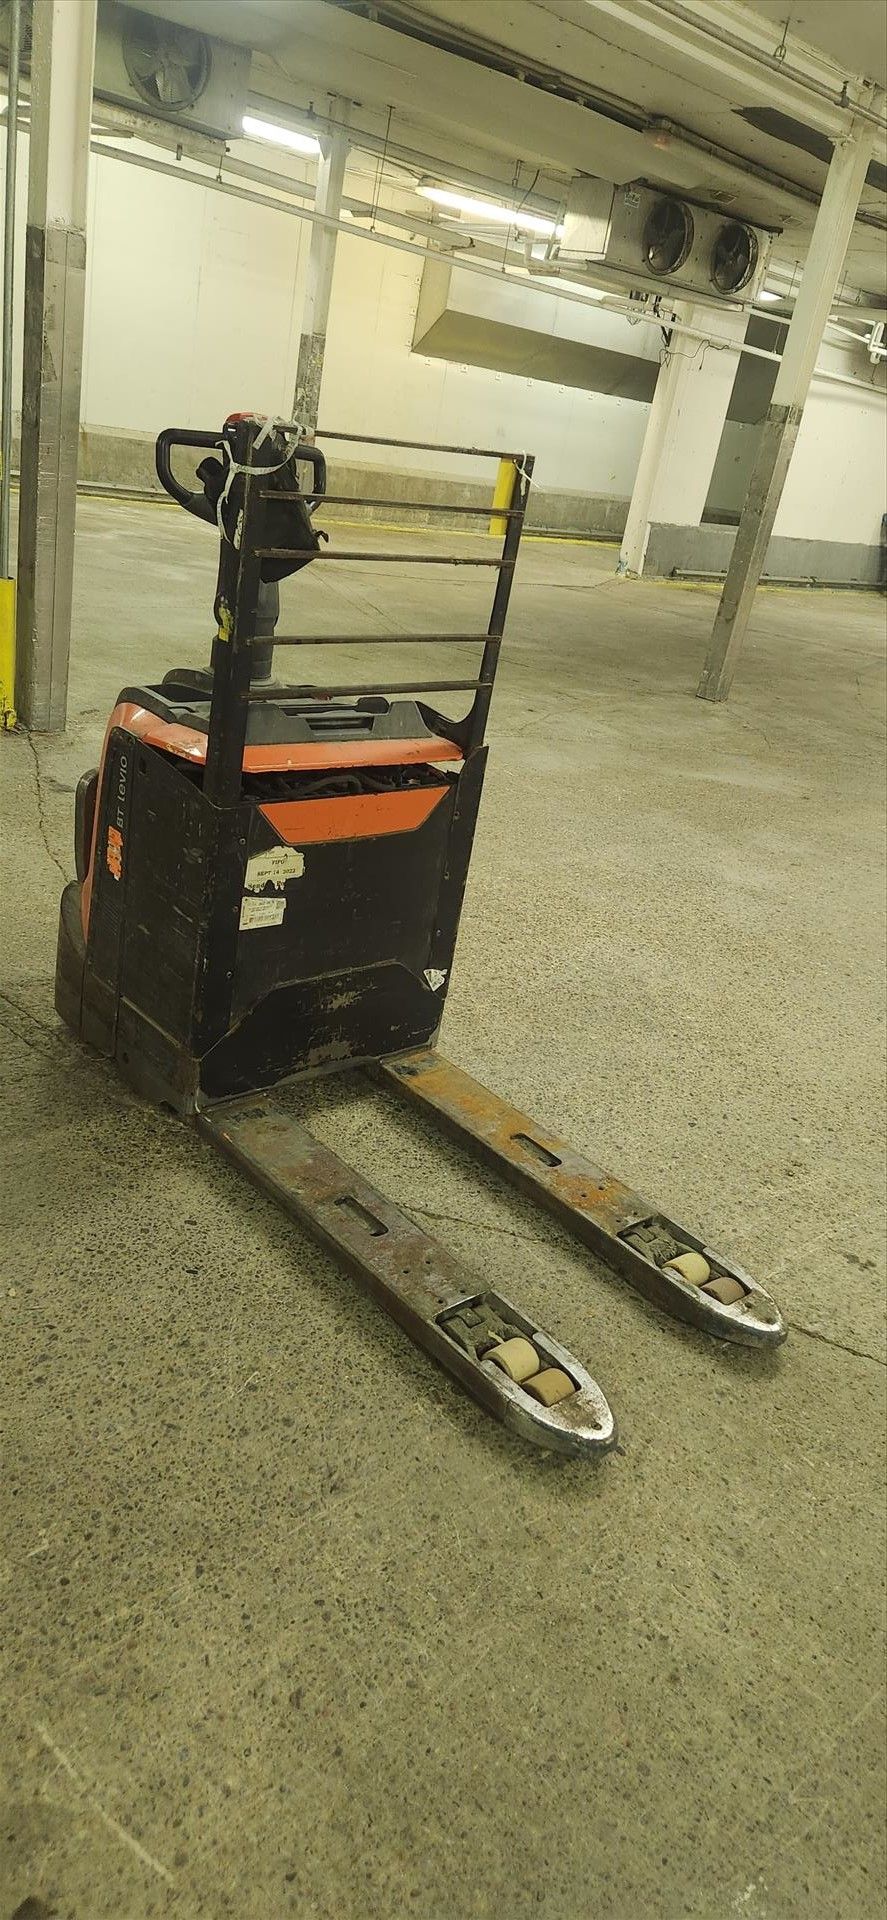 BT ride-on platform electric pallet truck, mod. Levio LPE200, 2000 lbs. cap. 24V c/w battery (code 1 - Image 2 of 3